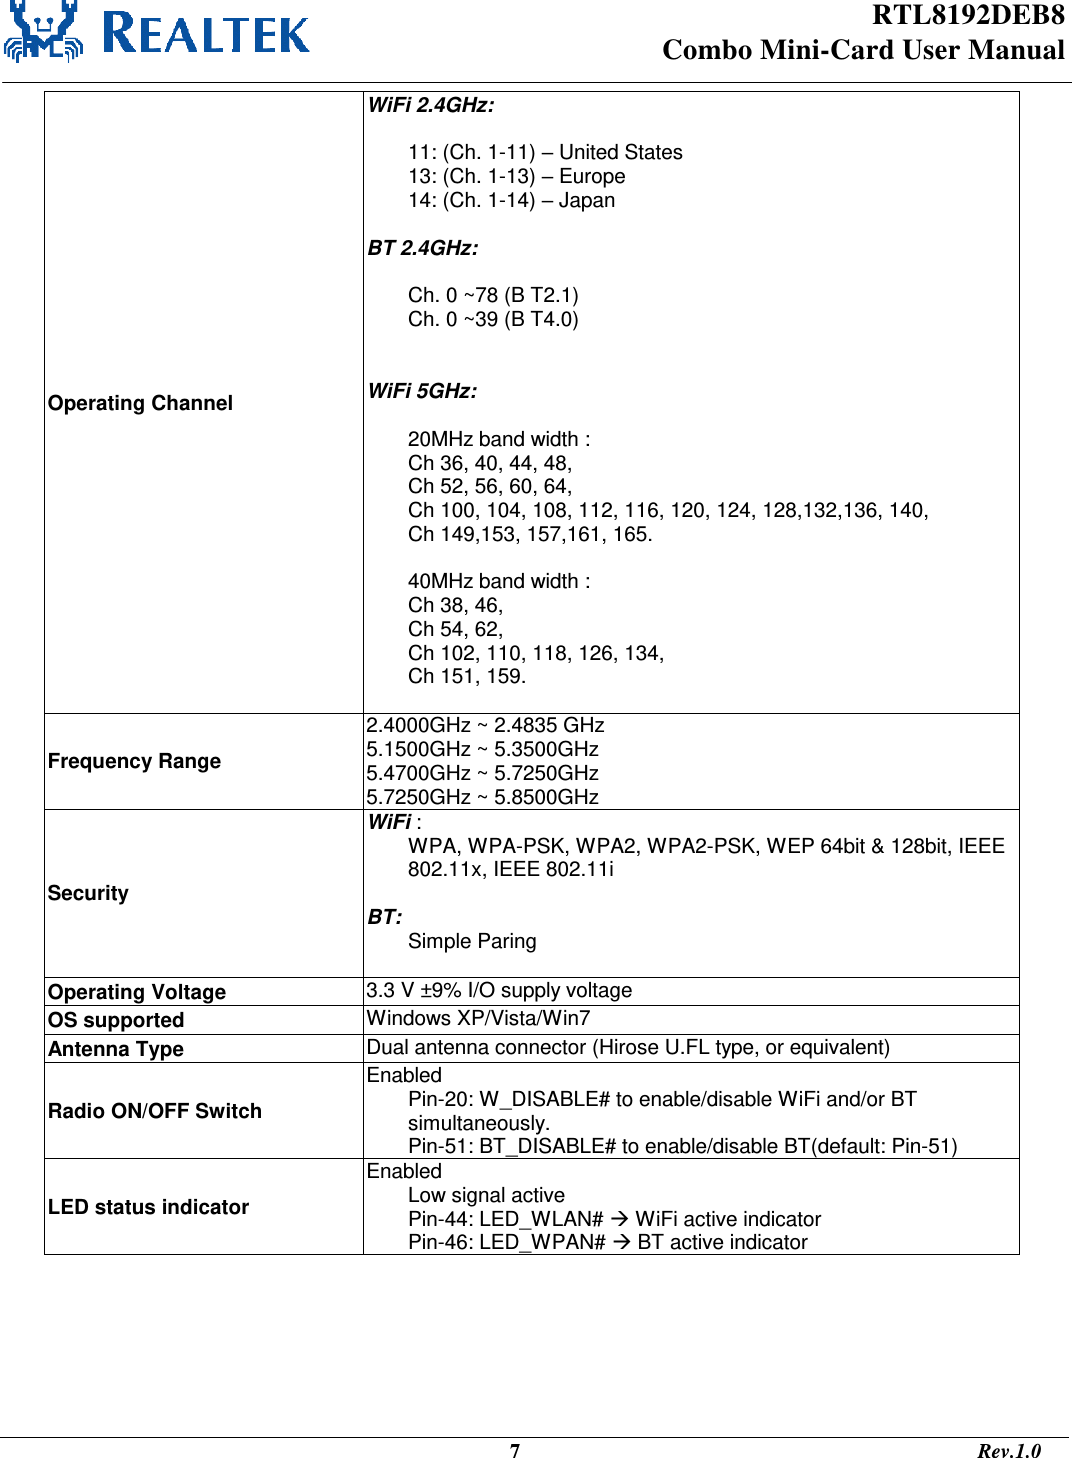 RTL8192DEB8 Combo Mini-Card User Manual                                                                                              7                                                                                       Rev.1.0  Operating Channel WiFi 2.4GHz:  11: (Ch. 1-11) – United States 13: (Ch. 1-13) – Europe 14: (Ch. 1-14) – Japan  BT 2.4GHz:  Ch. 0 ~78 (B T2.1) Ch. 0 ~39 (B T4.0)   WiFi 5GHz:  20MHz band width :  Ch 36, 40, 44, 48,  Ch 52, 56, 60, 64,  Ch 100, 104, 108, 112, 116, 120, 124, 128,132,136, 140,  Ch 149,153, 157,161, 165.  40MHz band width :  Ch 38, 46,  Ch 54, 62,  Ch 102, 110, 118, 126, 134, Ch 151, 159.  Frequency Range  2.4000GHz ~ 2.4835 GHz 5.1500GHz ~ 5.3500GHz 5.4700GHz ~ 5.7250GHz 5.7250GHz ~ 5.8500GHz Security WiFi : WPA, WPA-PSK, WPA2, WPA2-PSK, WEP 64bit &amp; 128bit, IEEE 802.11x, IEEE 802.11i  BT: Simple Paring  Operating Voltage 3.3 V ±9% I/O supply voltage OS supported Windows XP/Vista/Win7 Antenna Type Dual antenna connector (Hirose U.FL type, or equivalent) Radio ON/OFF Switch Enabled Pin-20: W_DISABLE# to enable/disable WiFi and/or BT simultaneously. Pin-51: BT_DISABLE# to enable/disable BT(default: Pin-51) LED status indicator Enabled Low signal active Pin-44: LED_WLAN#  WiFi active indicator Pin-46: LED_WPAN#  BT active indicator   